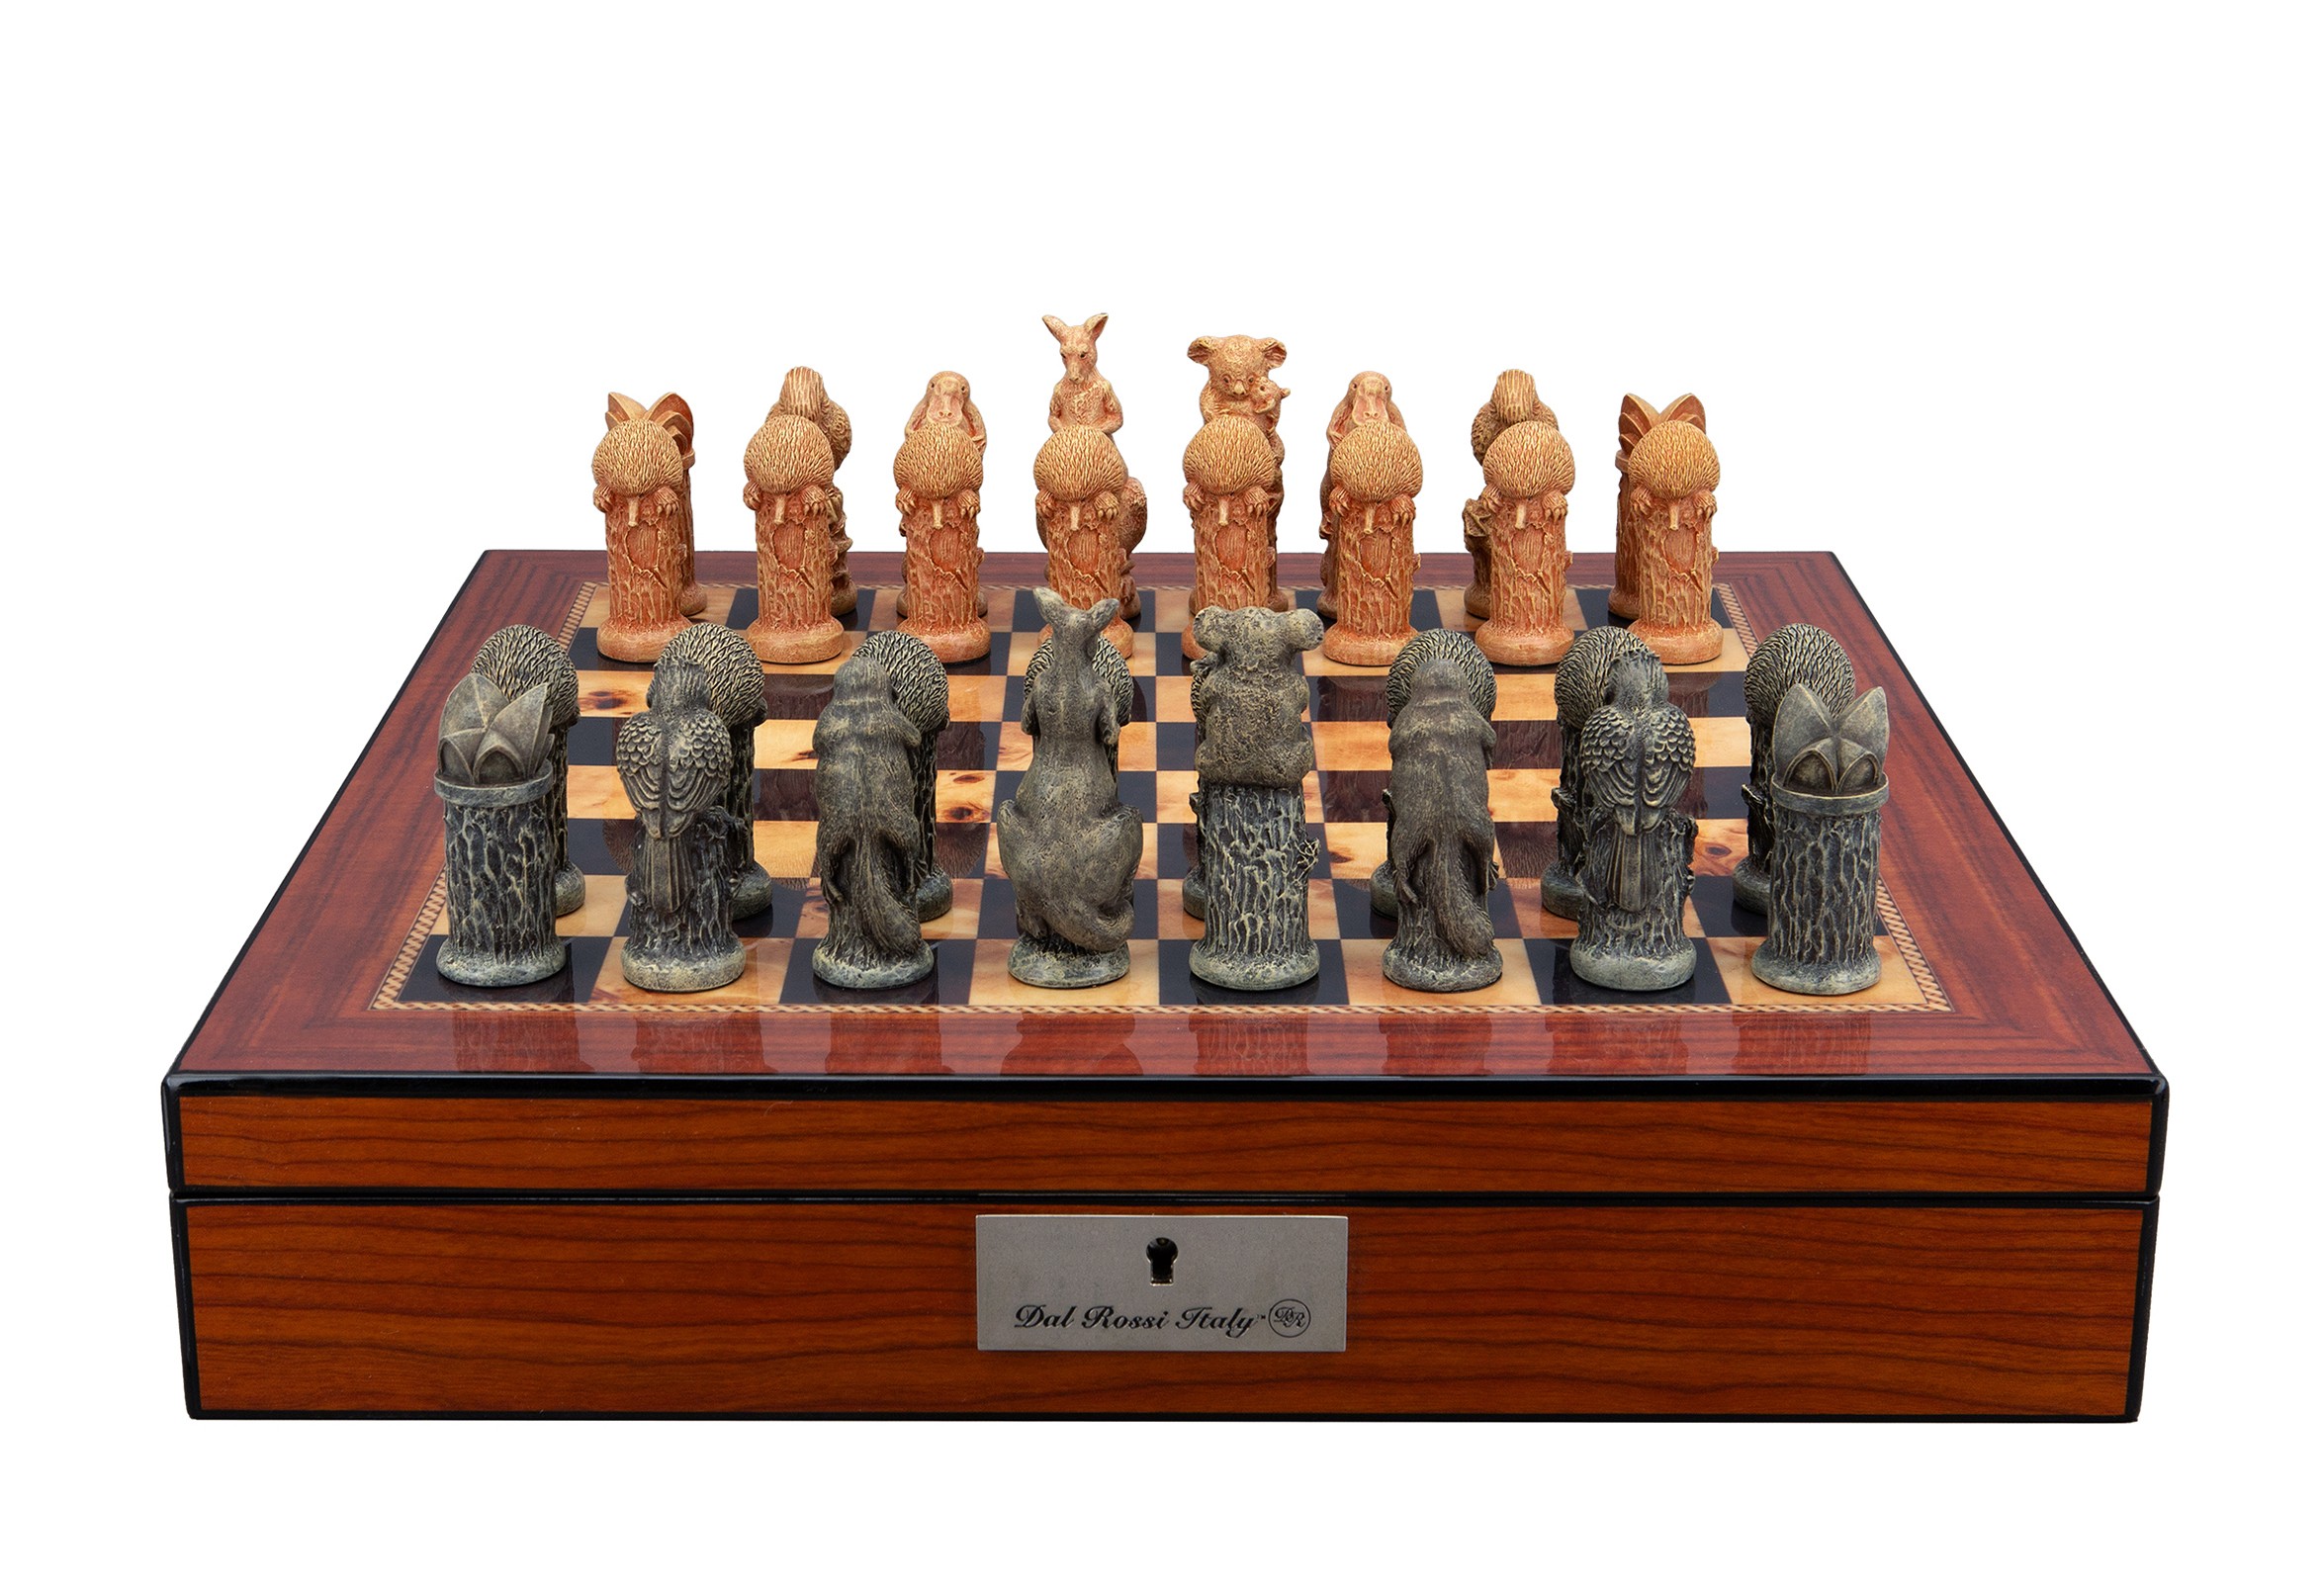 Dal Rossi Hand Paint - Australiana Chessmen on a Walnut Finish Shiny Chess Box with Compartments 16"